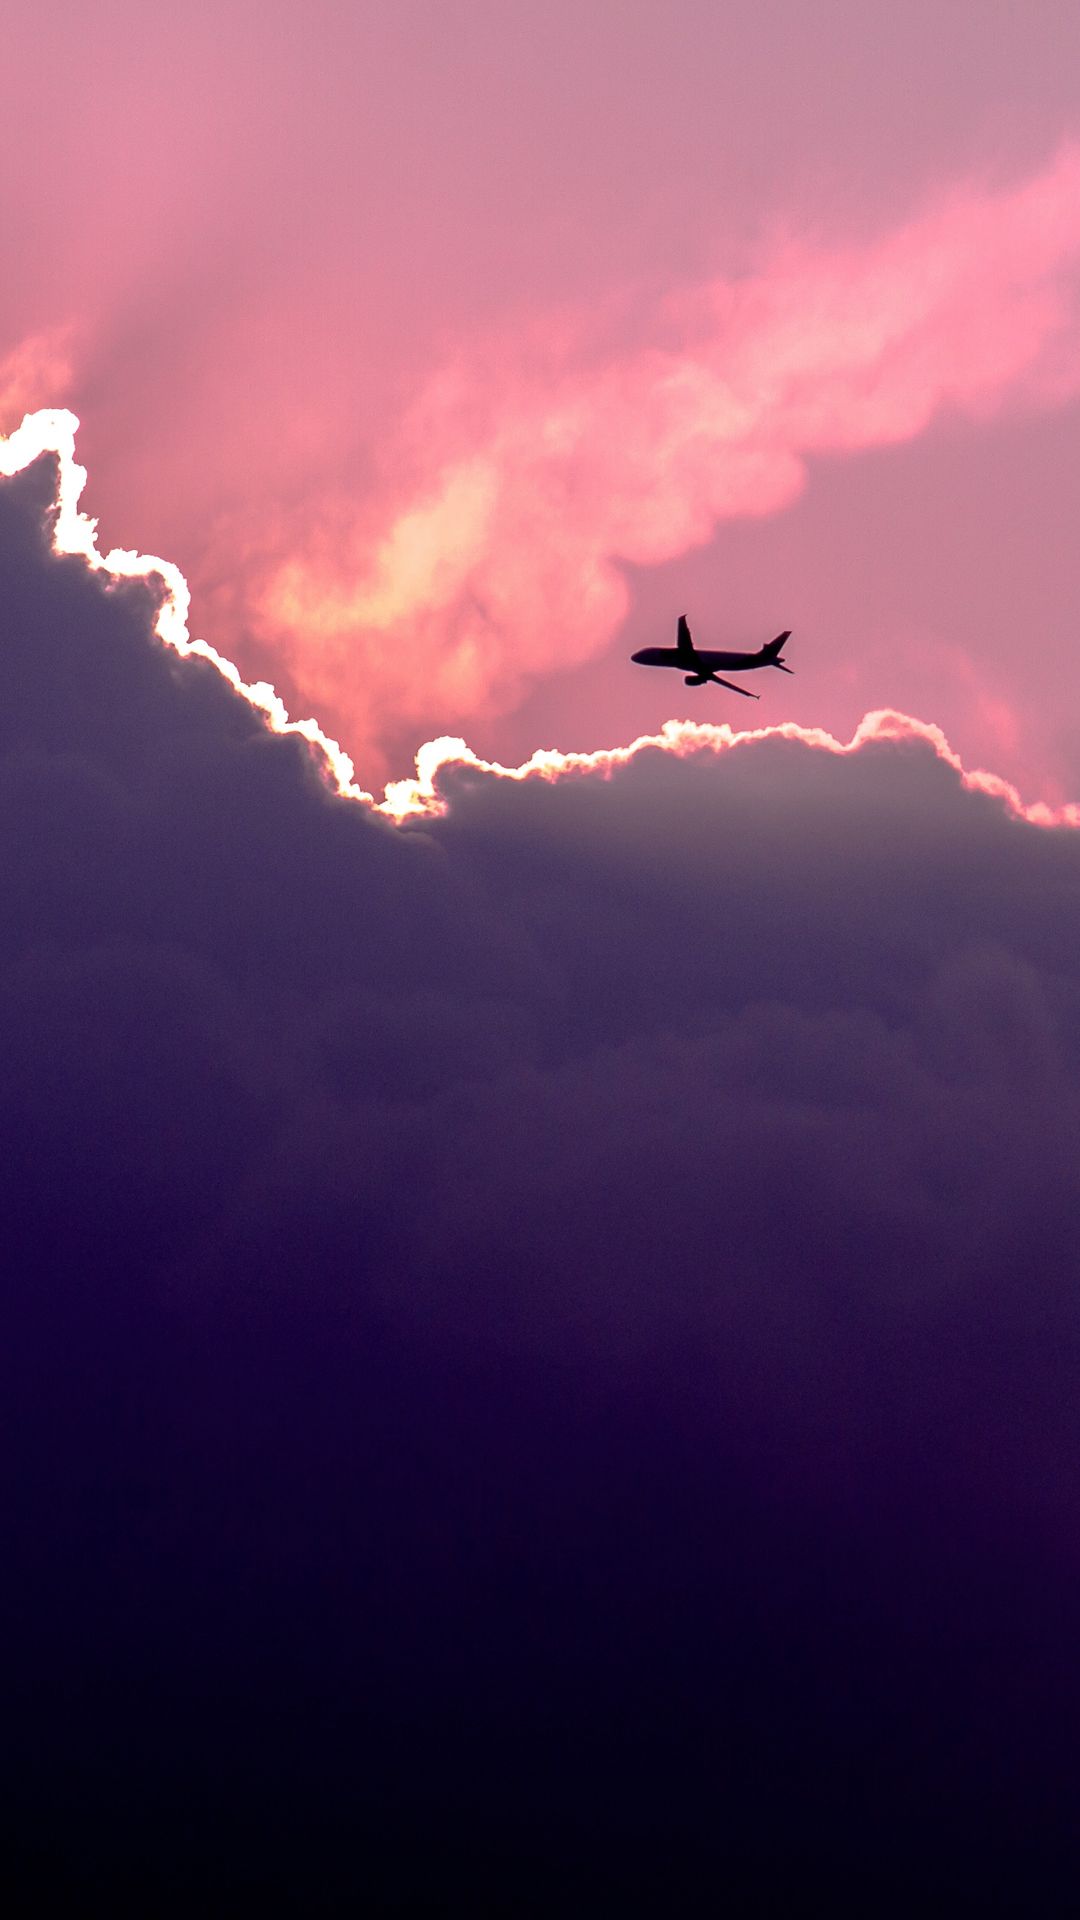 Plane Over Clouds Sunset Android Wallpaper free download